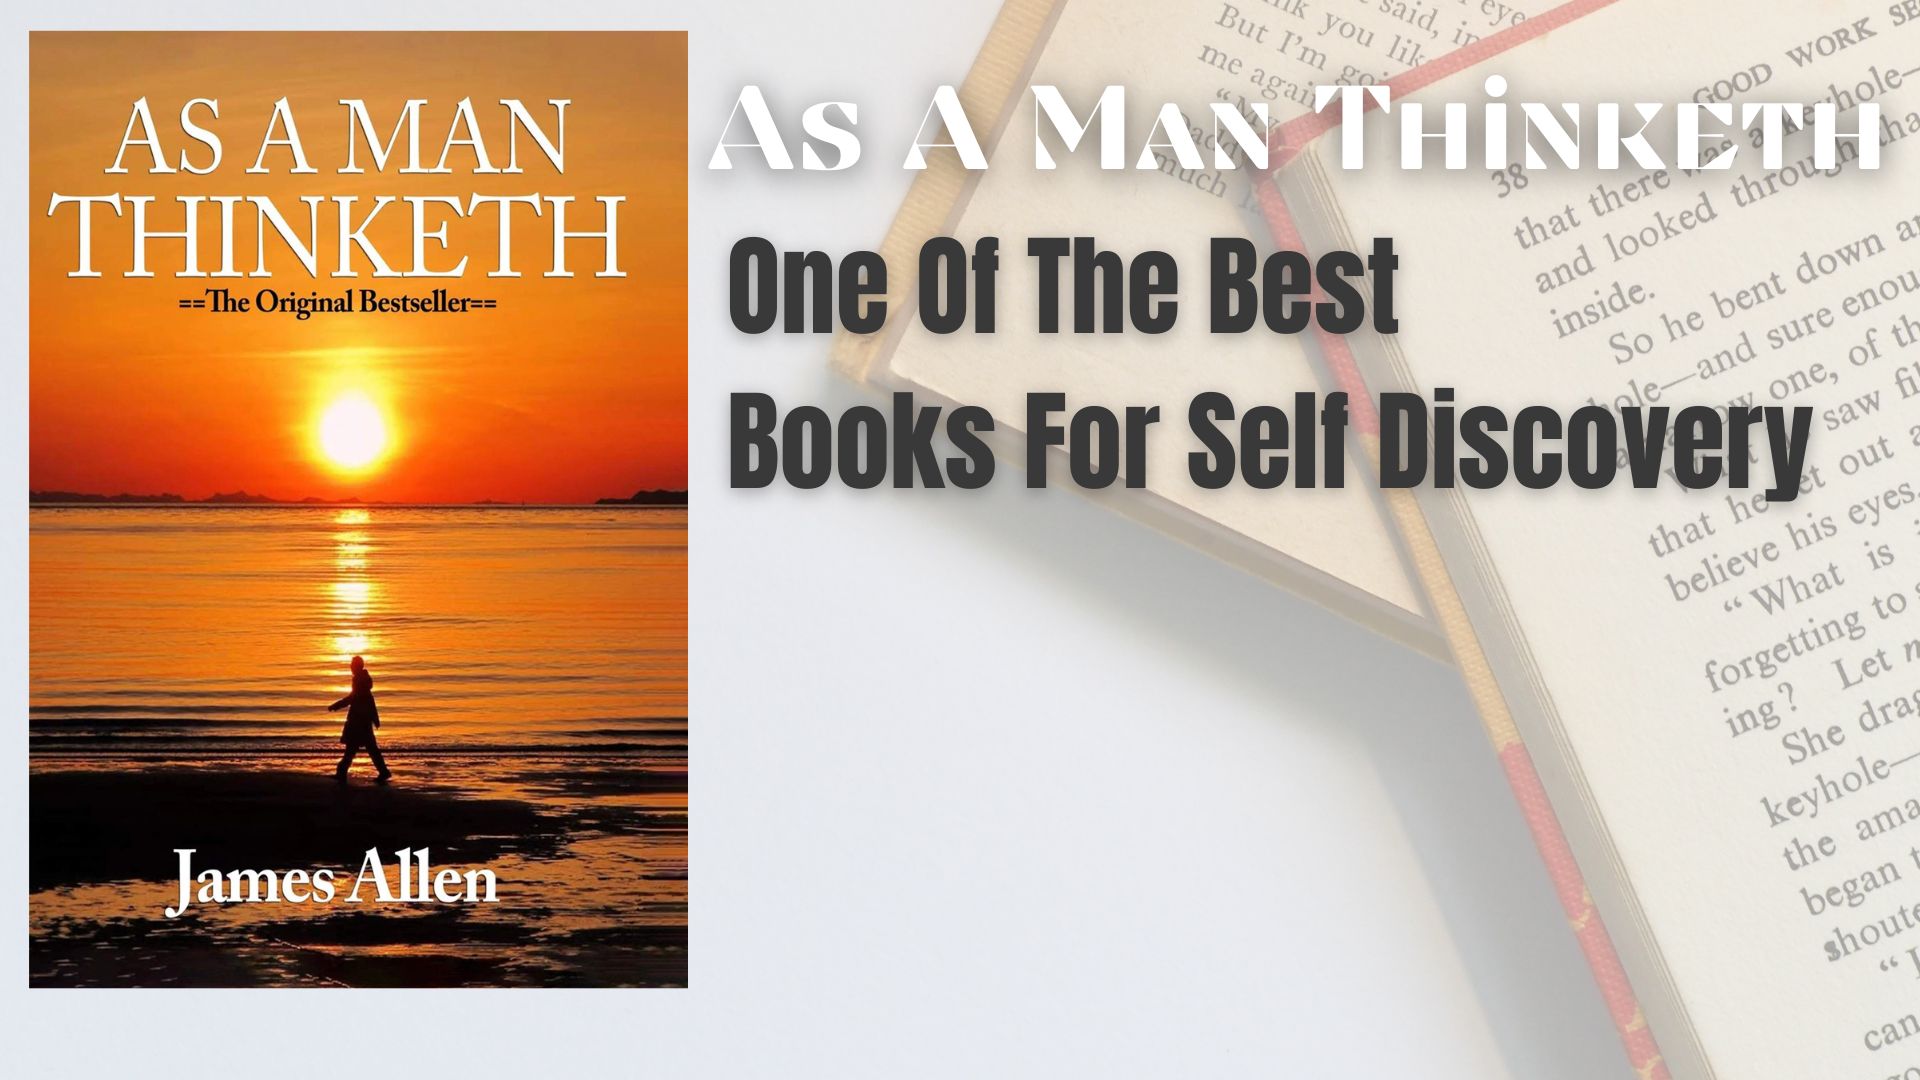 As A Man Thinketh - One Of the Best Books For Self Discovery